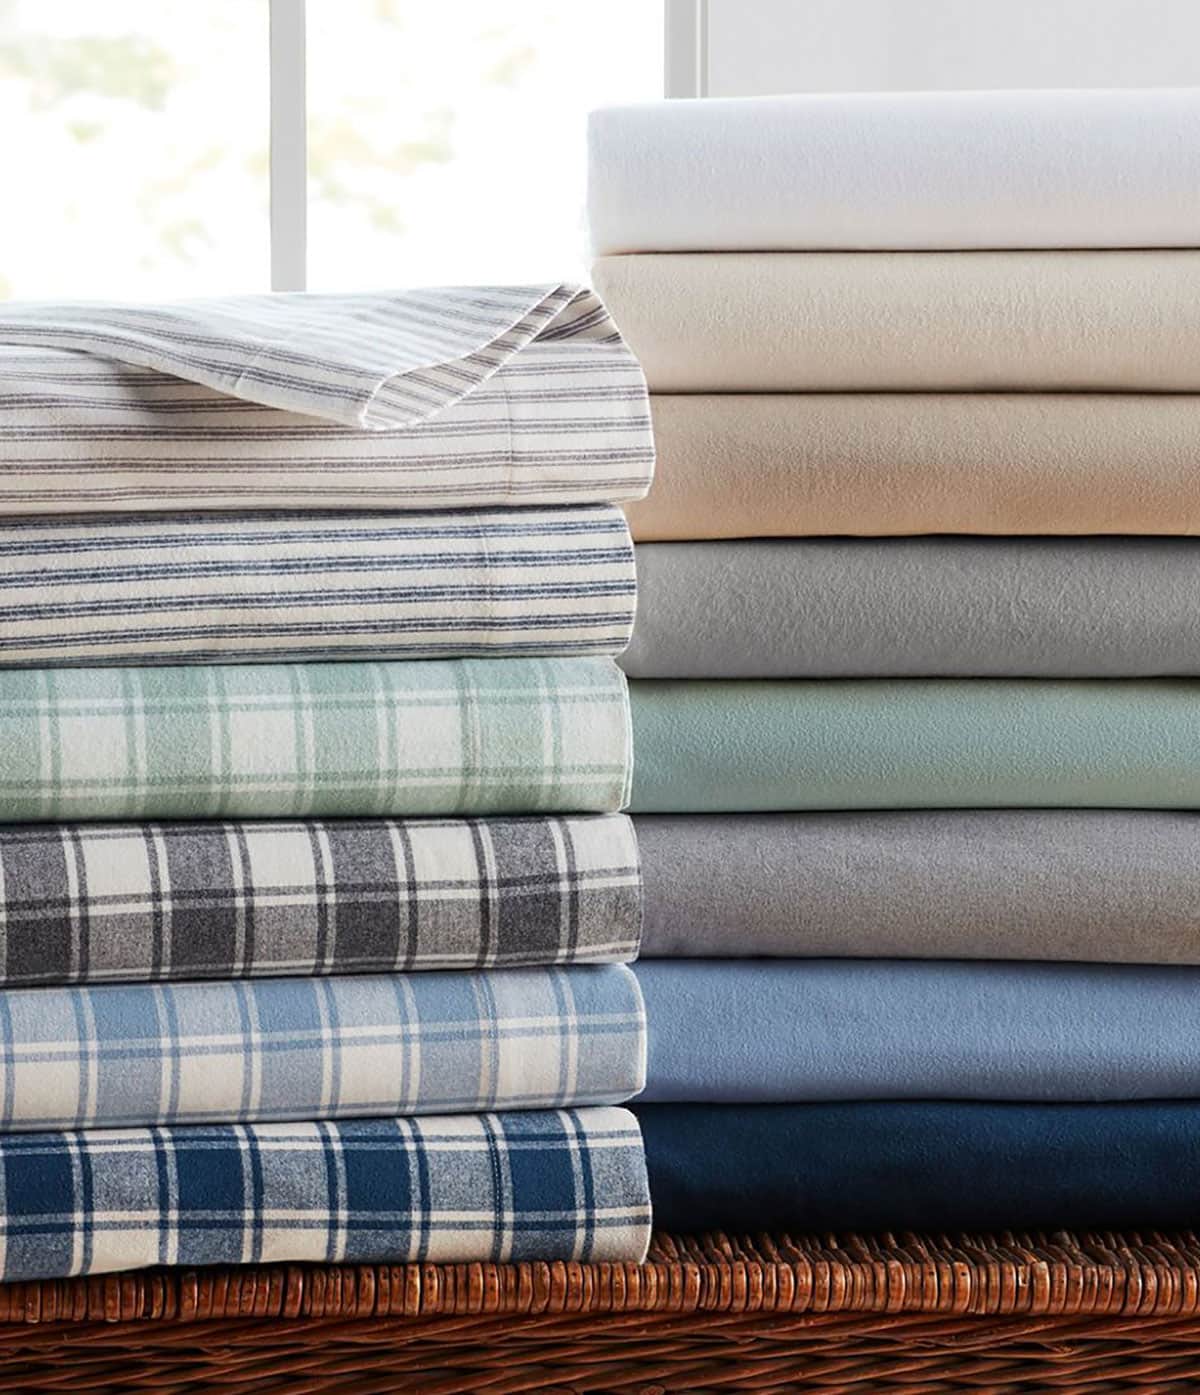 Cozy Flannel Sheets to keep you warm this winter - Buying sheets isn't easy because there's so many to choose from. I've rounded up the best sheets for hot sleepers, linen sheets, flannel, wrinkle free and more! 